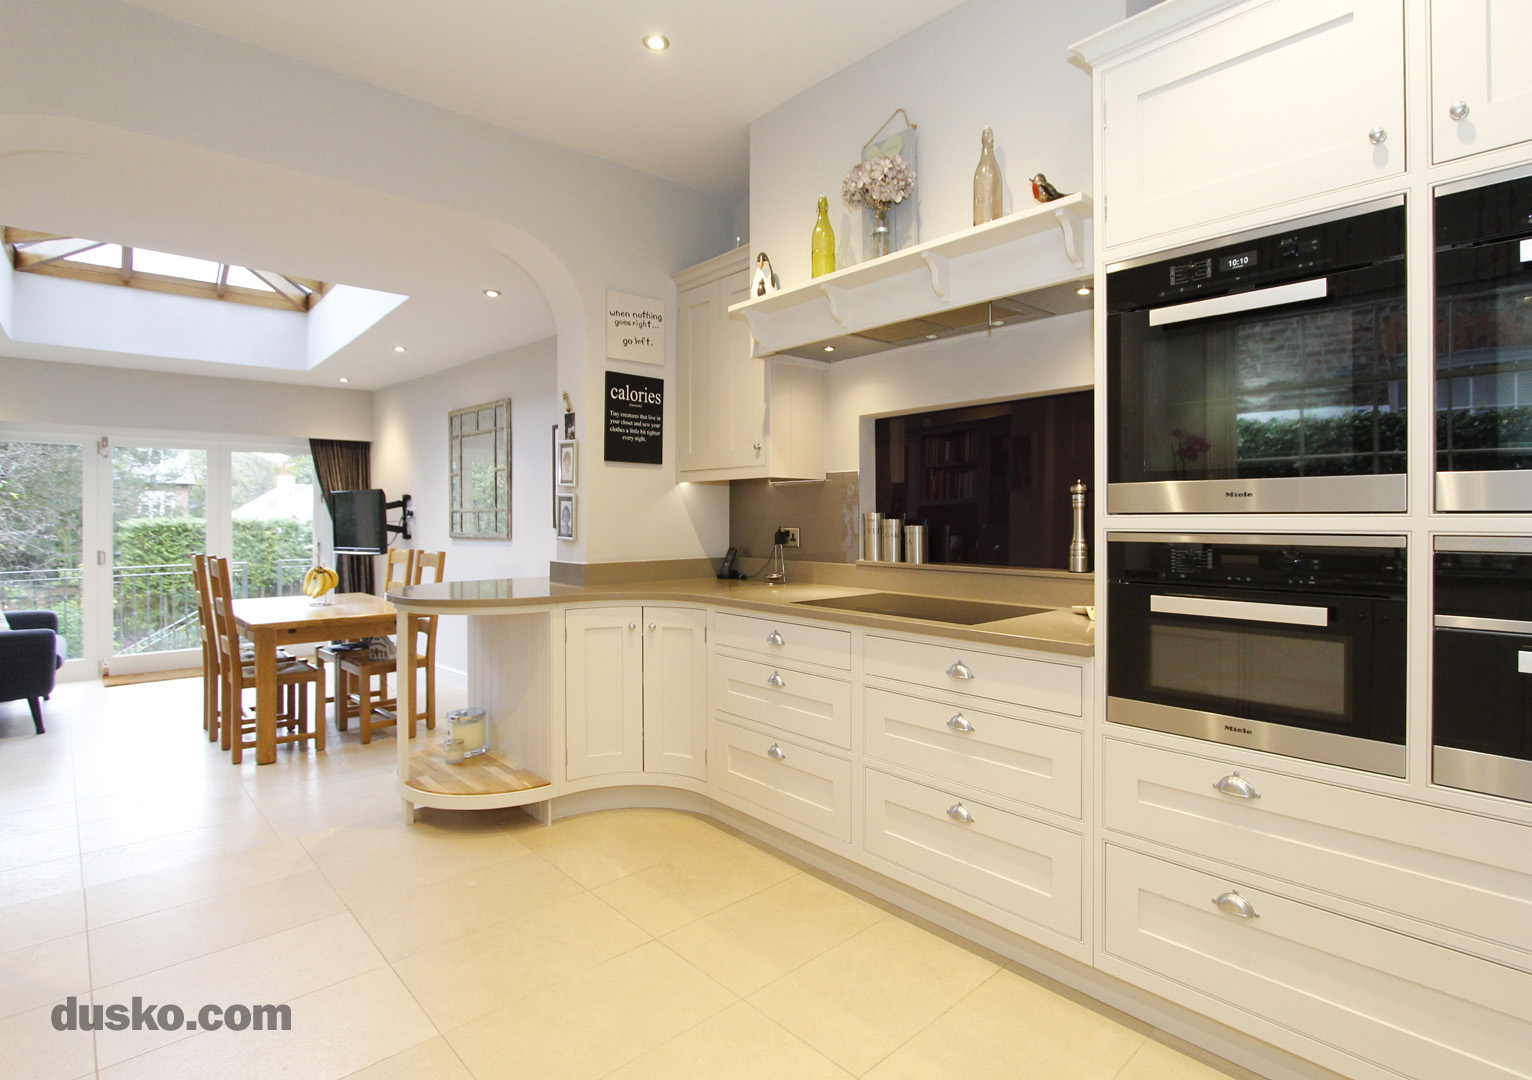 In Frame Kitchen in Bowdon, Cheshire Miele Integrated Ovens